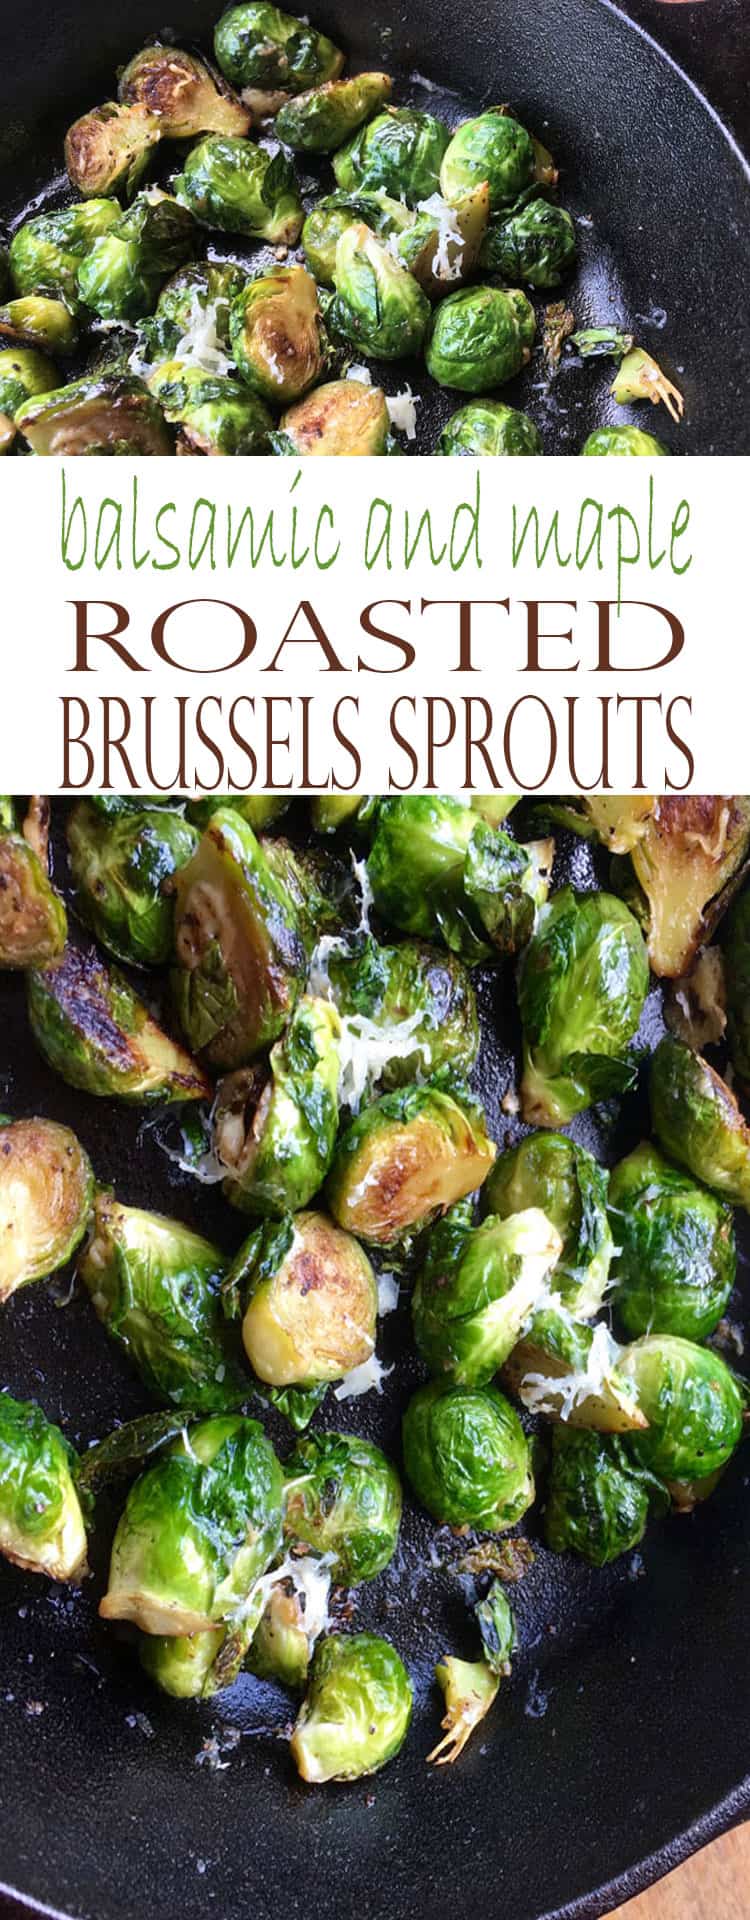 Balsamic and Maple Roasted Brussels Sprouts are the perfect healthy side dish. The Brussels sprouts are roasted to perfection and drizzled with a maple-balsamic glaze, making this dish the perfect combination of savory and sweet.